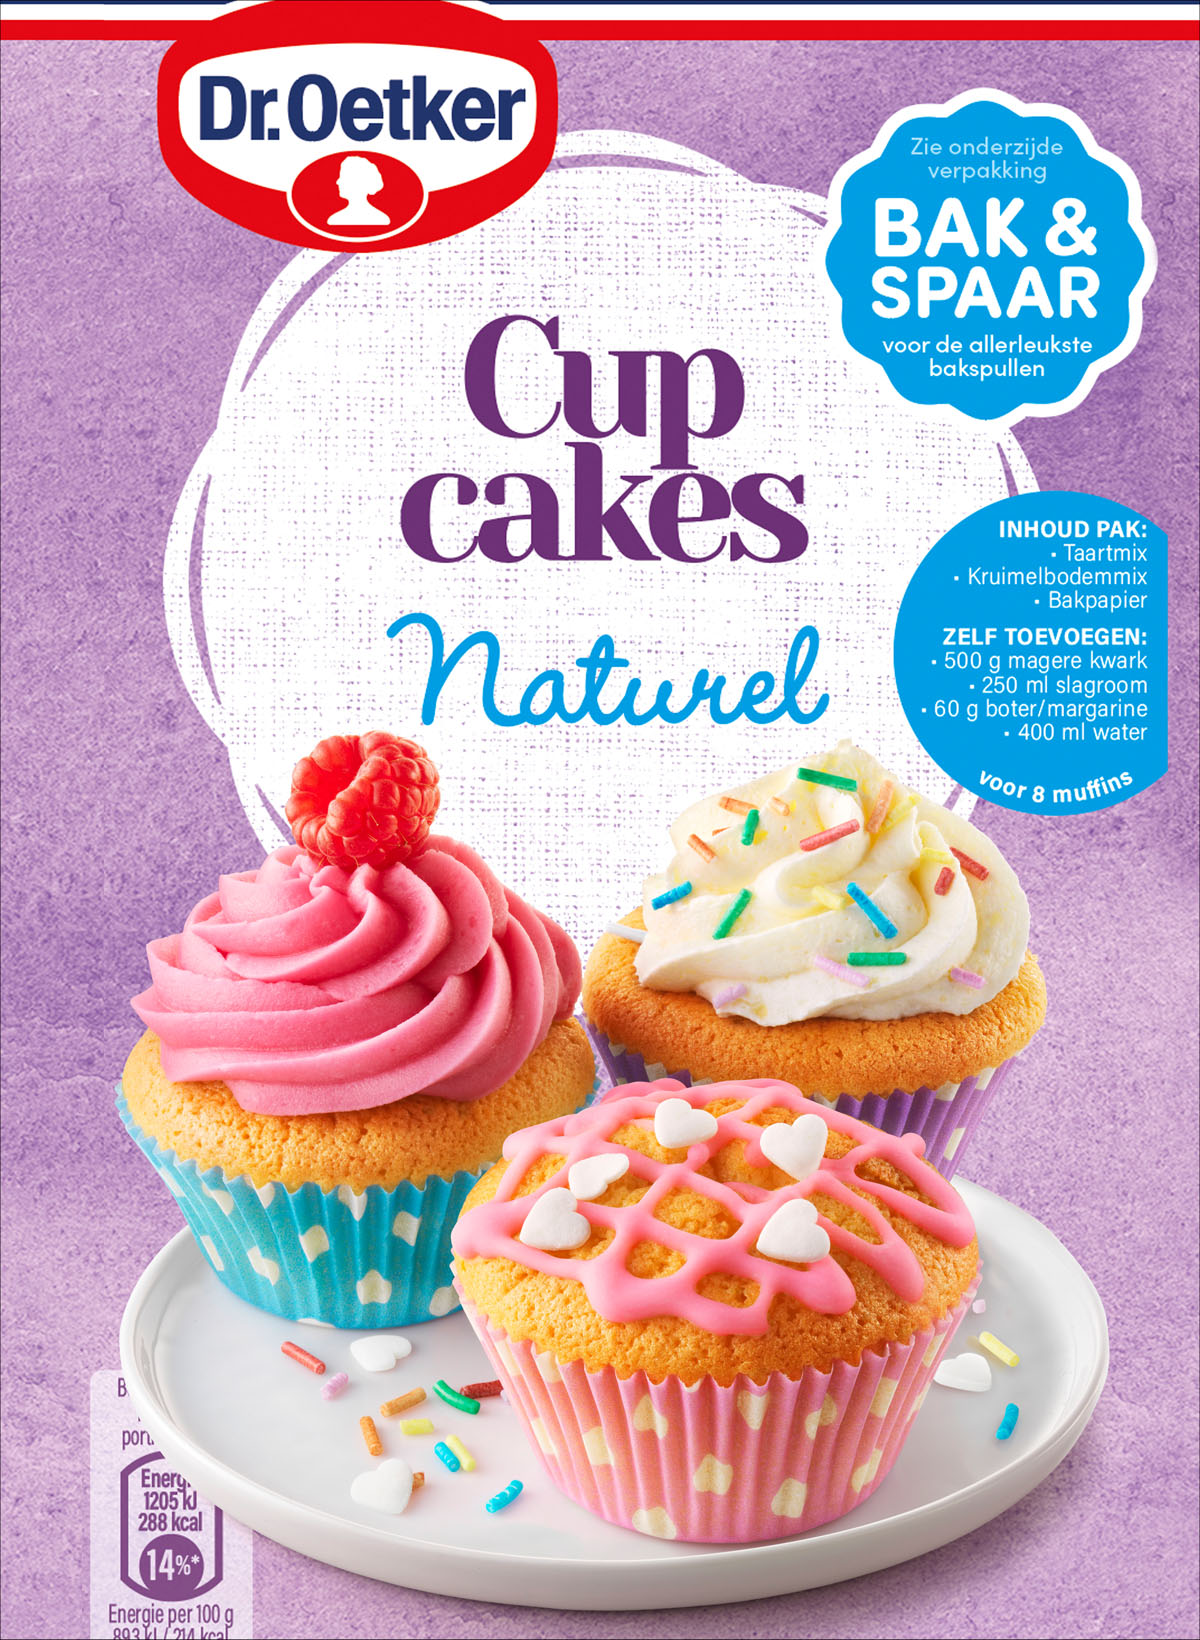 Dr Oetker Cupcakes packaging design photo by STUDIO_M food photography